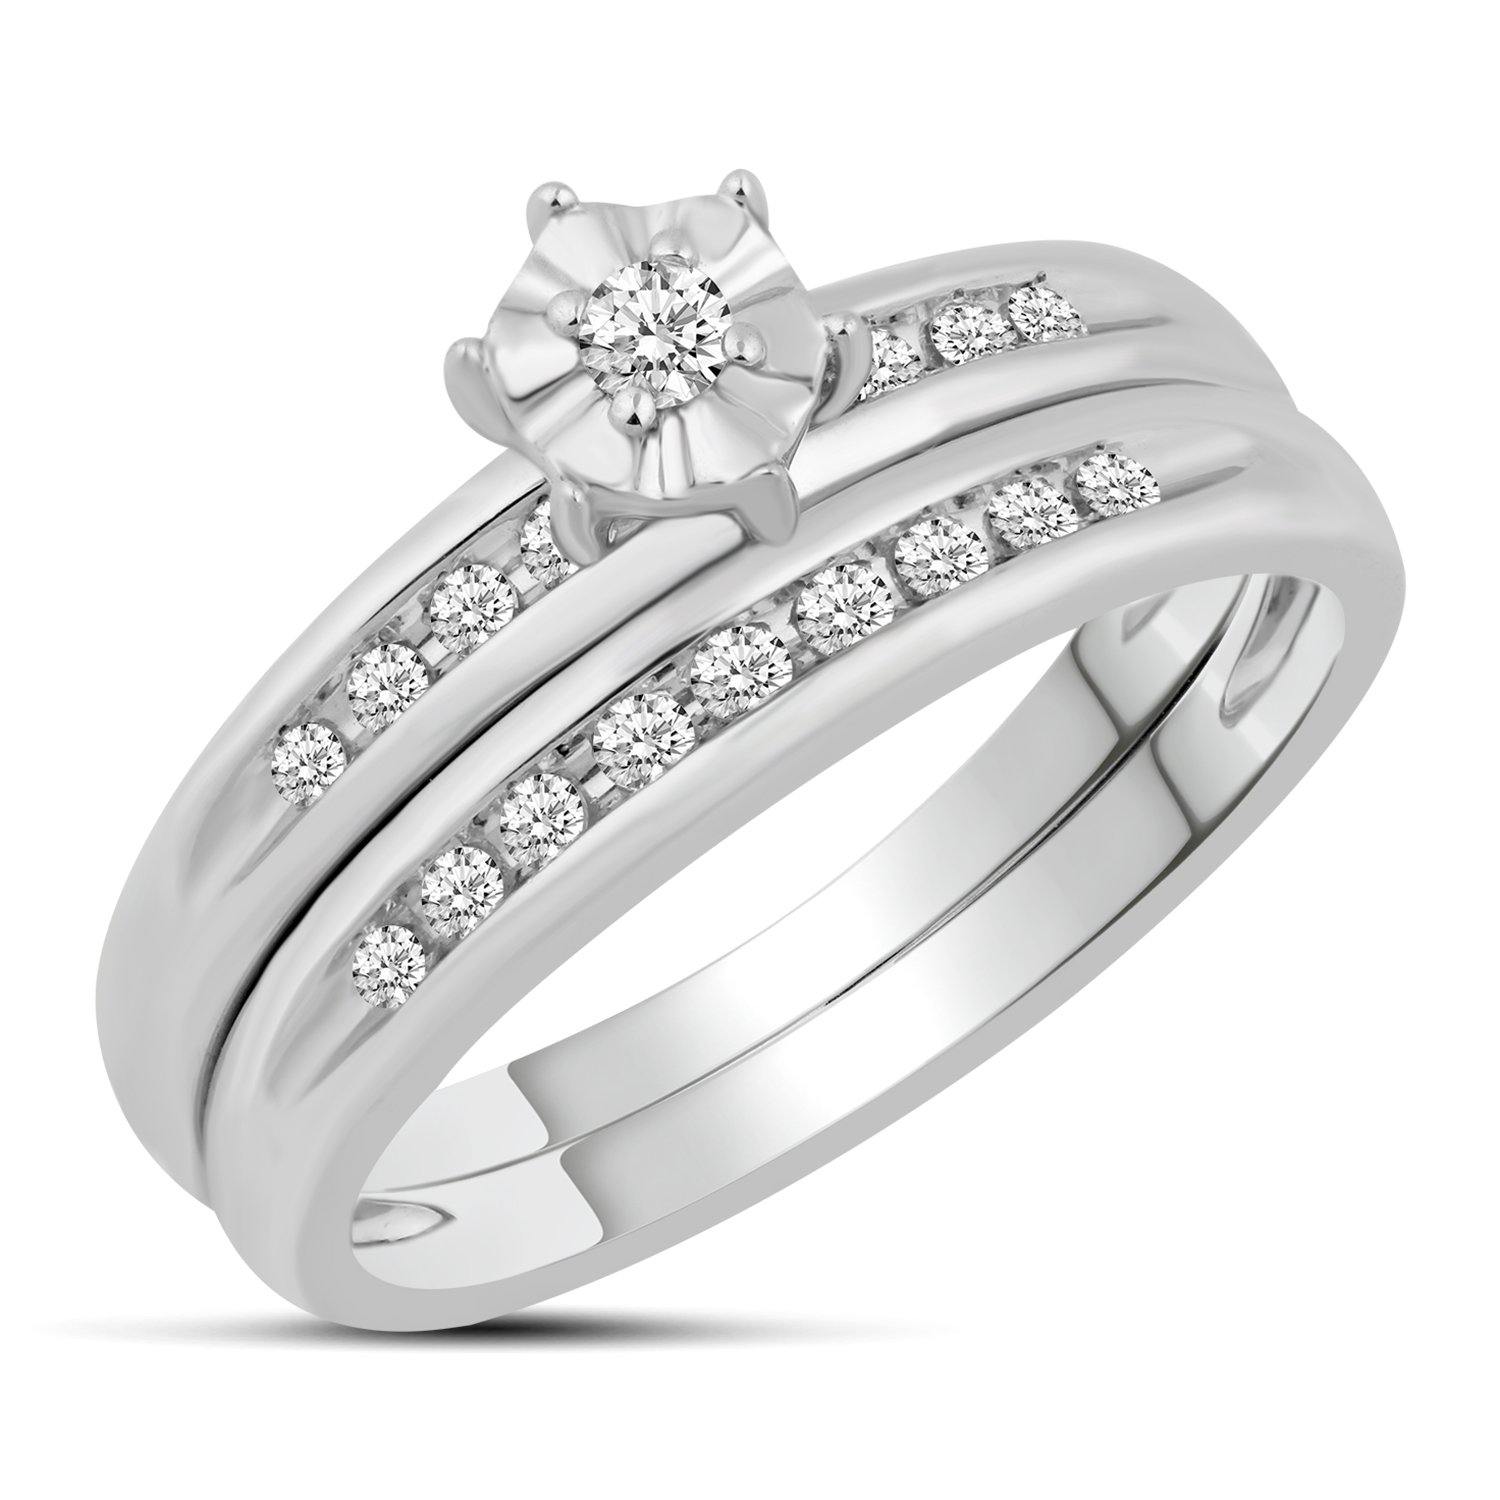 1/3CT TW Diamond Trio Bridal Set in 10KT White Gold - Fifth and Fine